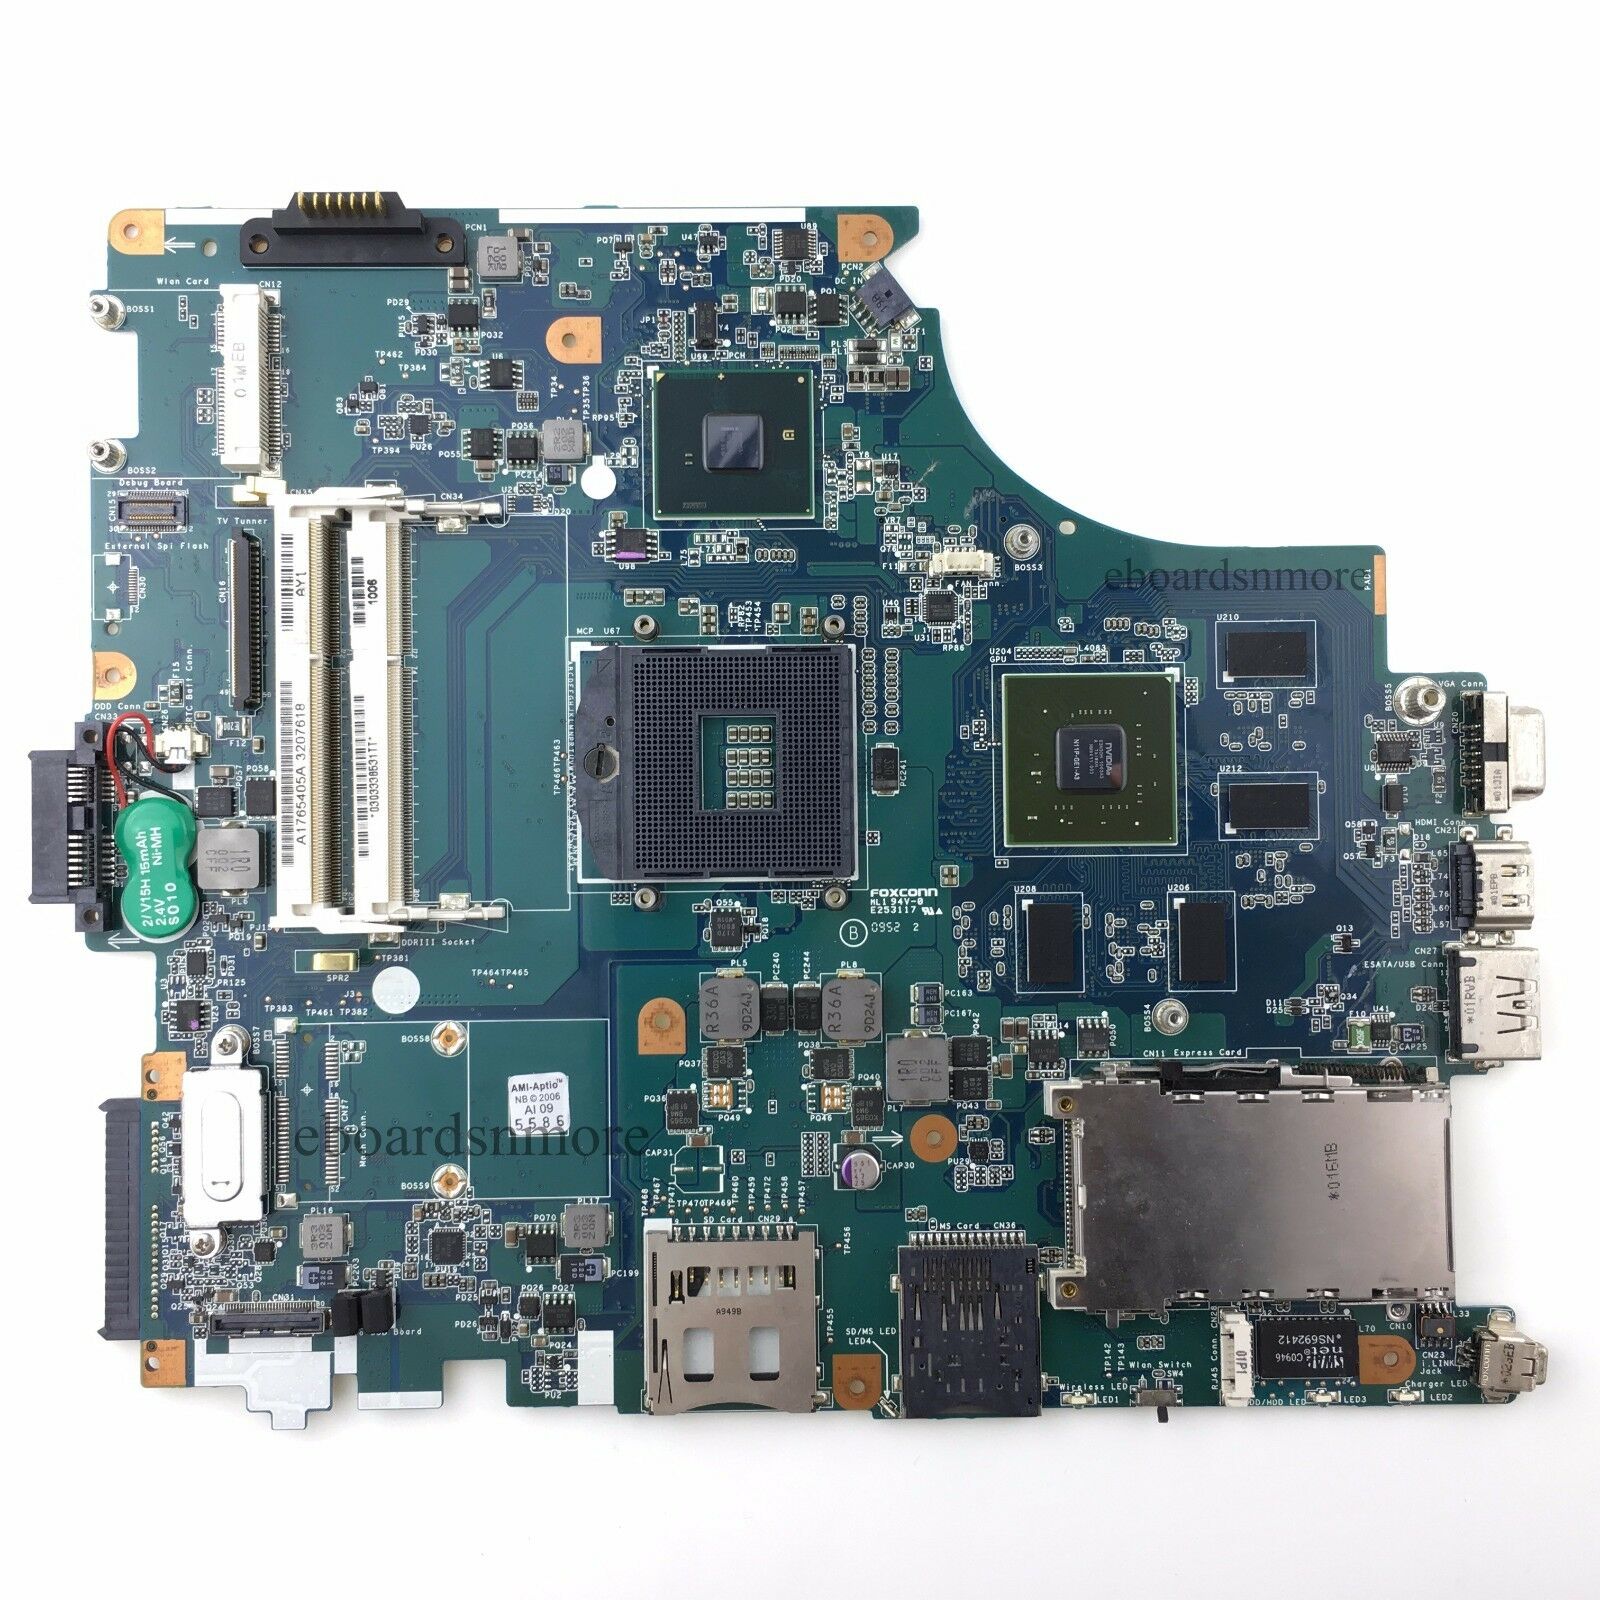 MBX-215 M930 Motherboard for Sony VAIO VPC-F11 VPCF115, N11P-GE1-A3 Video, A Brand: Sony Socket Type: SEE